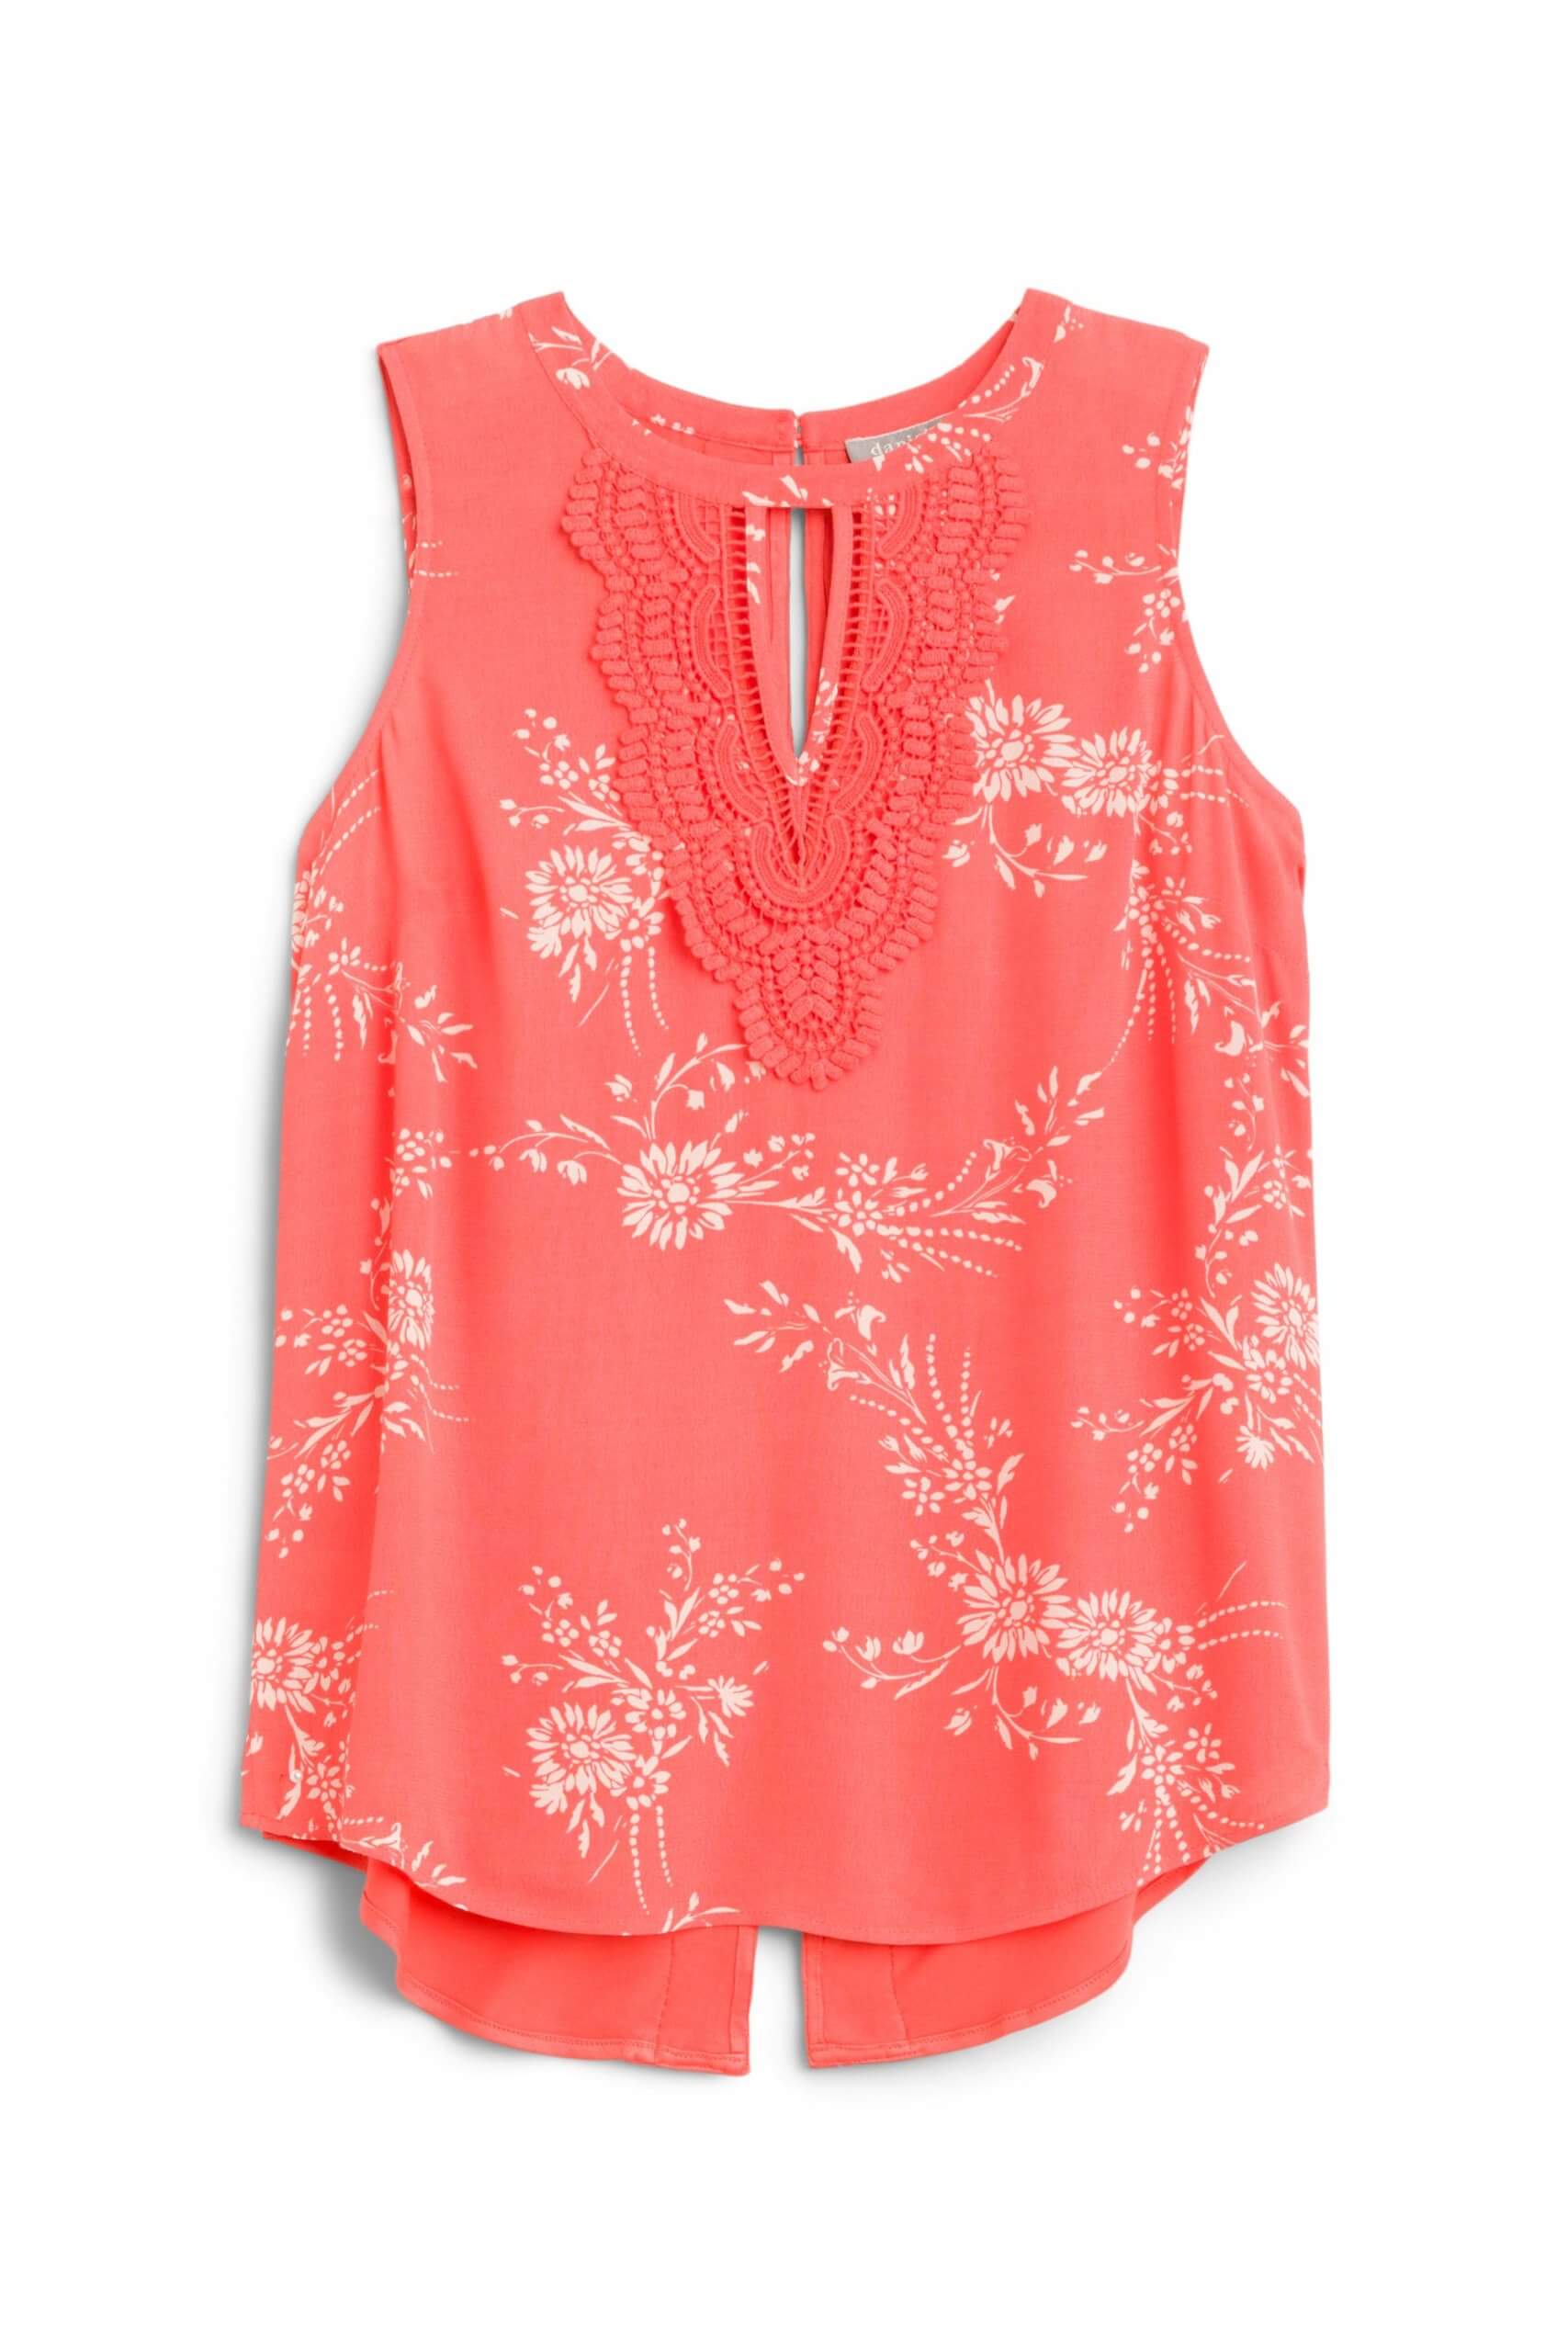 Stitch Fix Women’s sleeveless coral floral print blouse with keyhole.